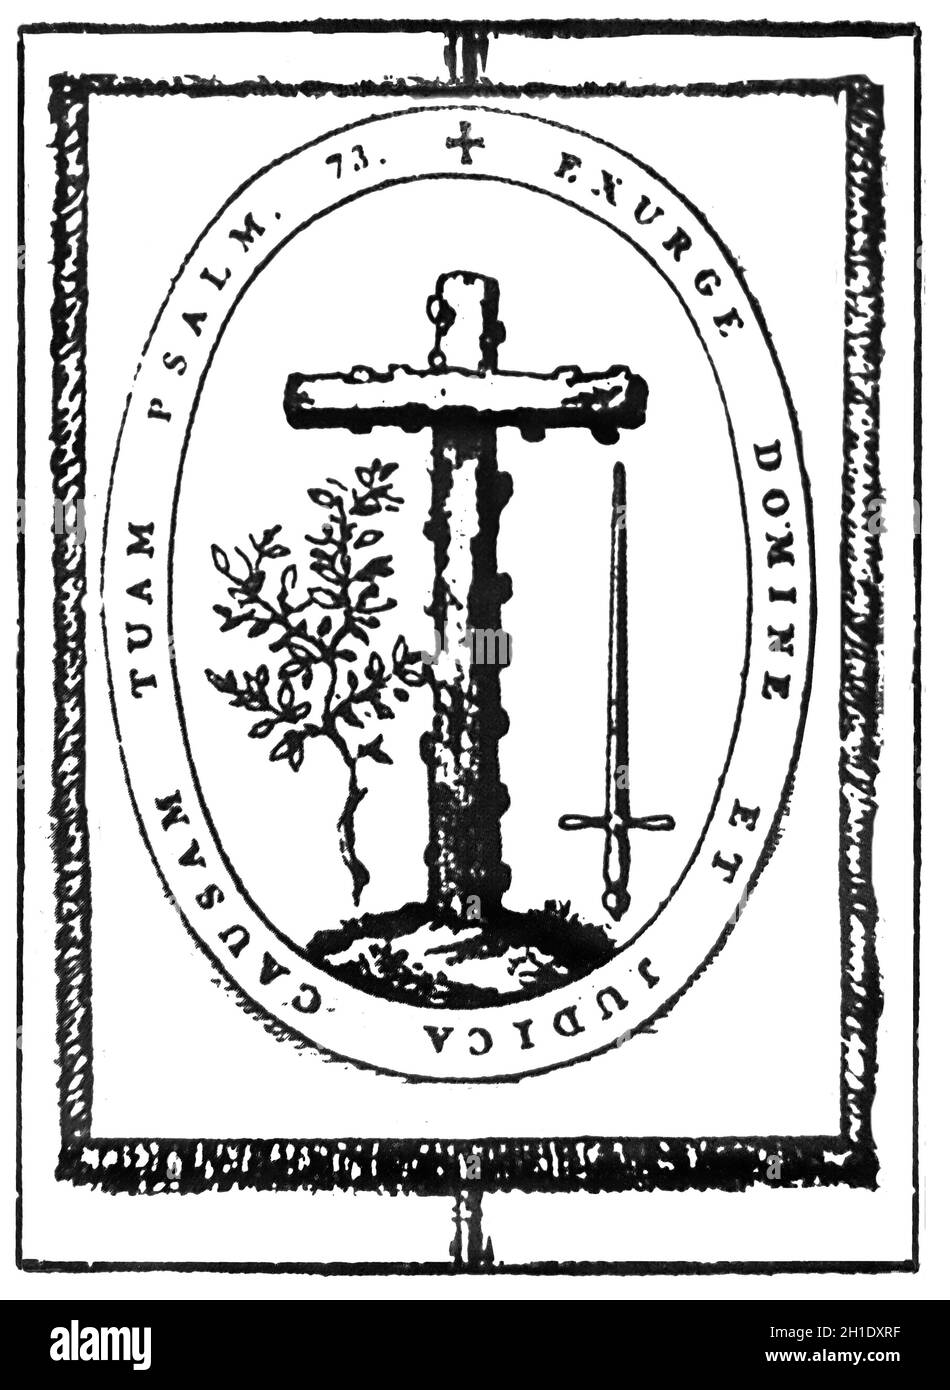 Emblem of the Spanish Inquisition, 1571. Catholic Church institution whose aim was to combat heresy Stock Photo